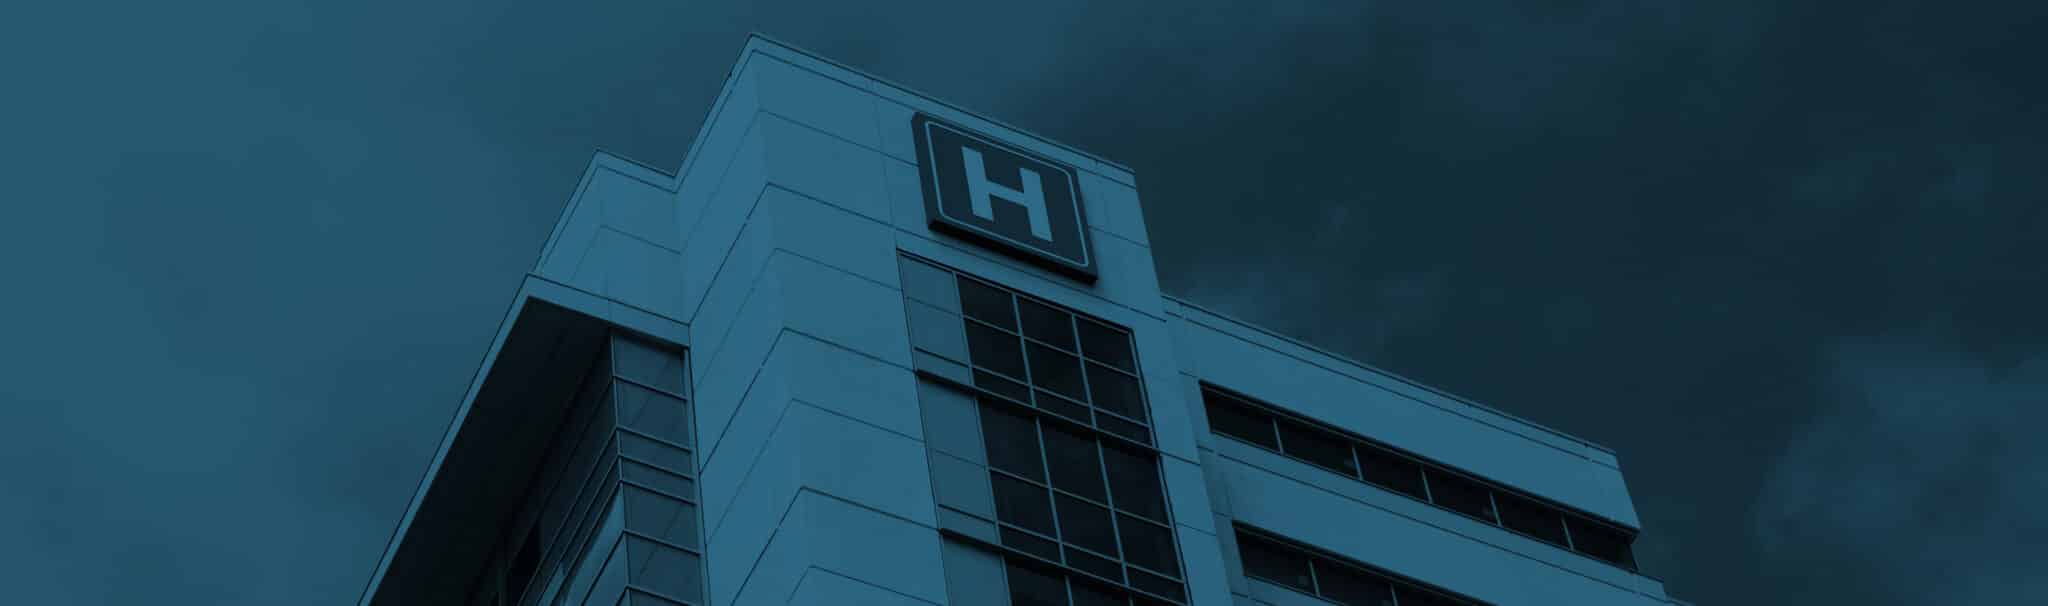 Does Your Hospital Wish to Remain Independent?